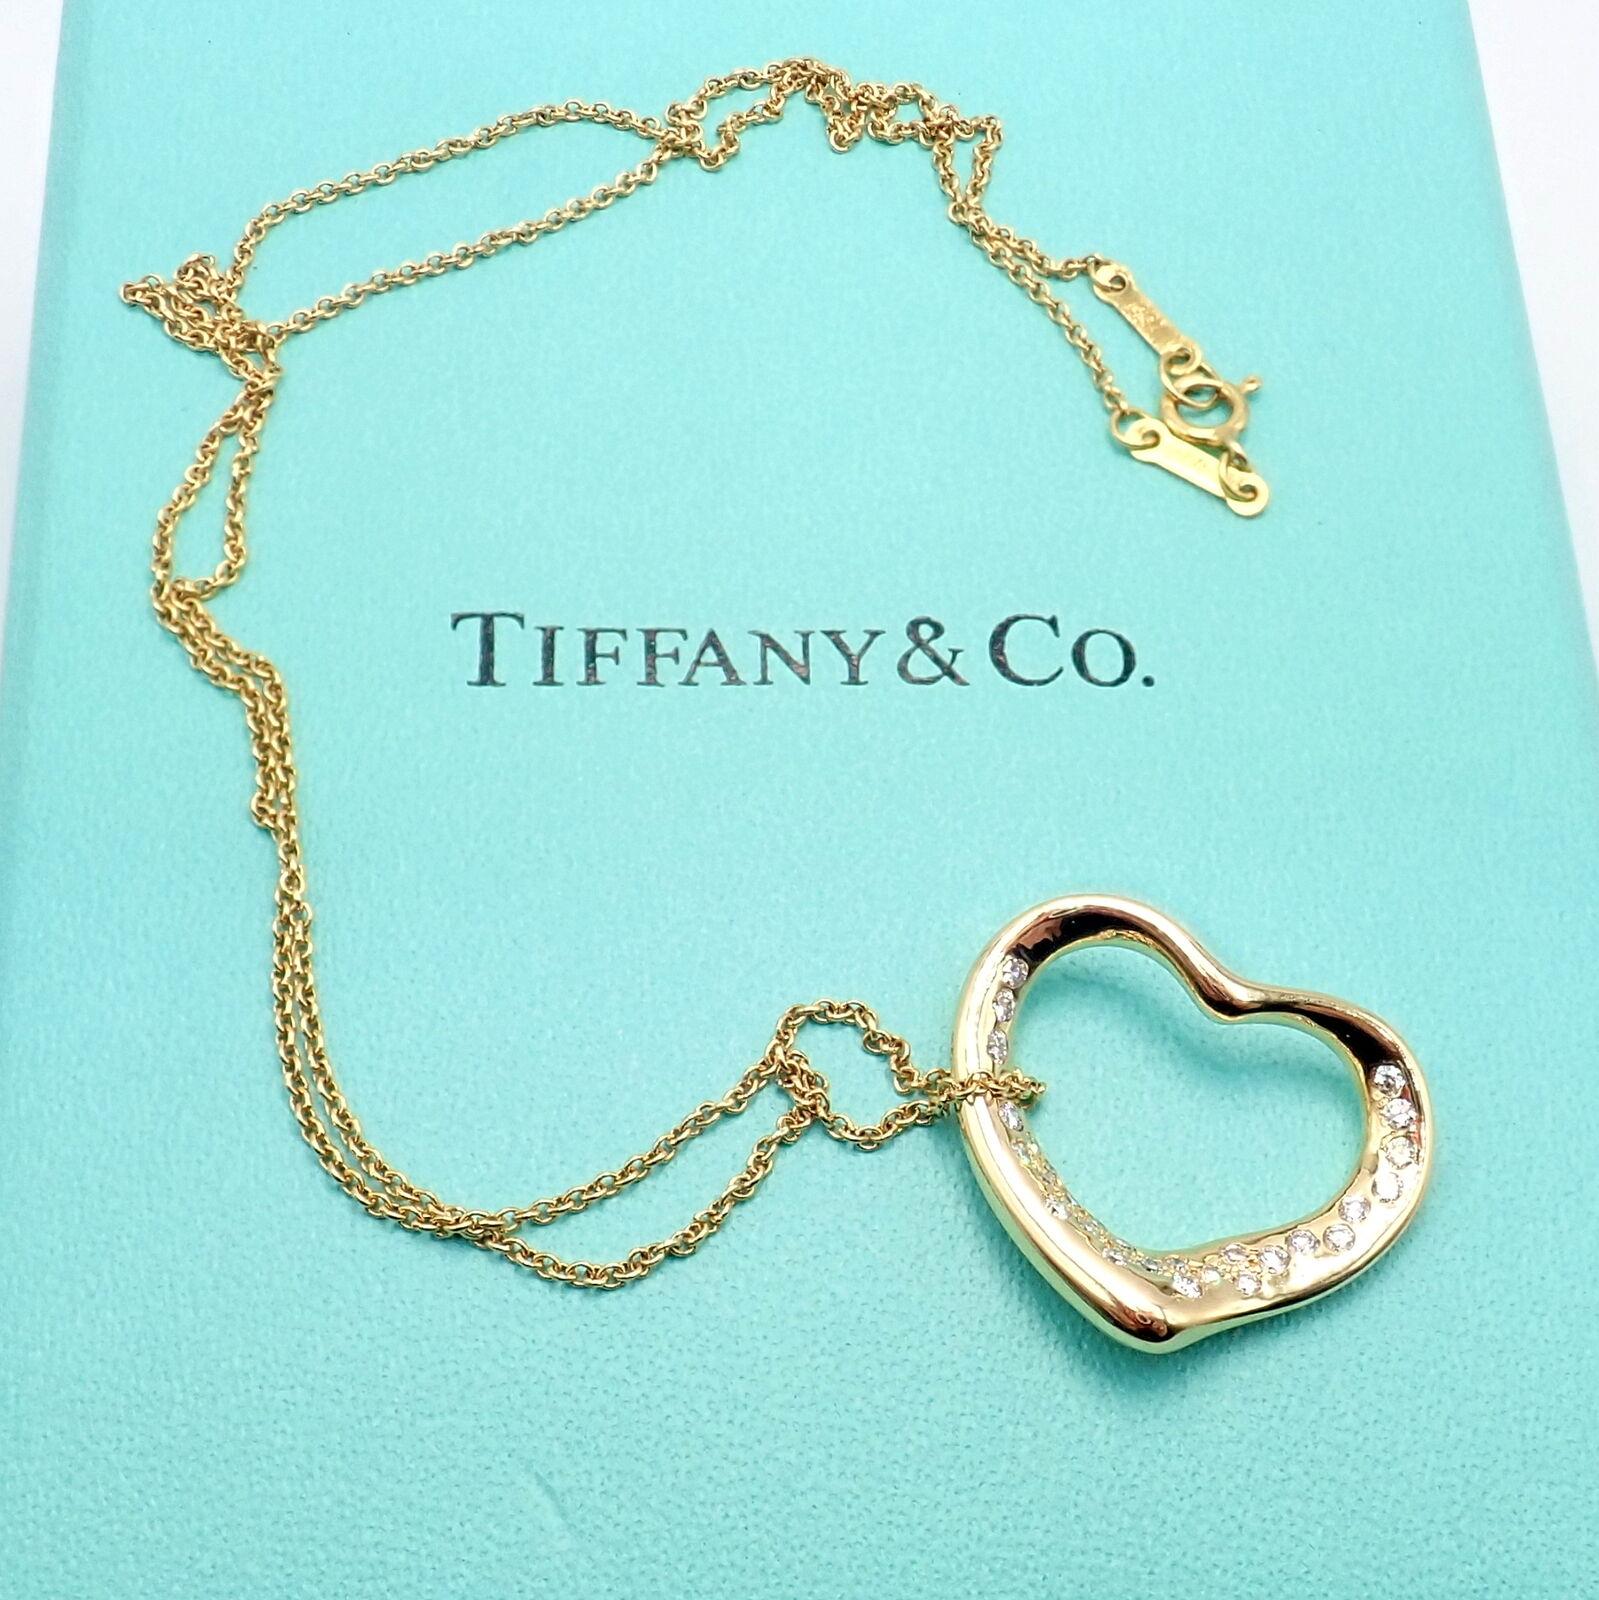 18k Yellow Gold Diamond Open Heart Pendant Necklace by Elsa Peretti for Tiffany & Co.
With Round brilliant cut diamonds VS1 clarity, G color total weight approx. .30ct
Details:
Length: 16